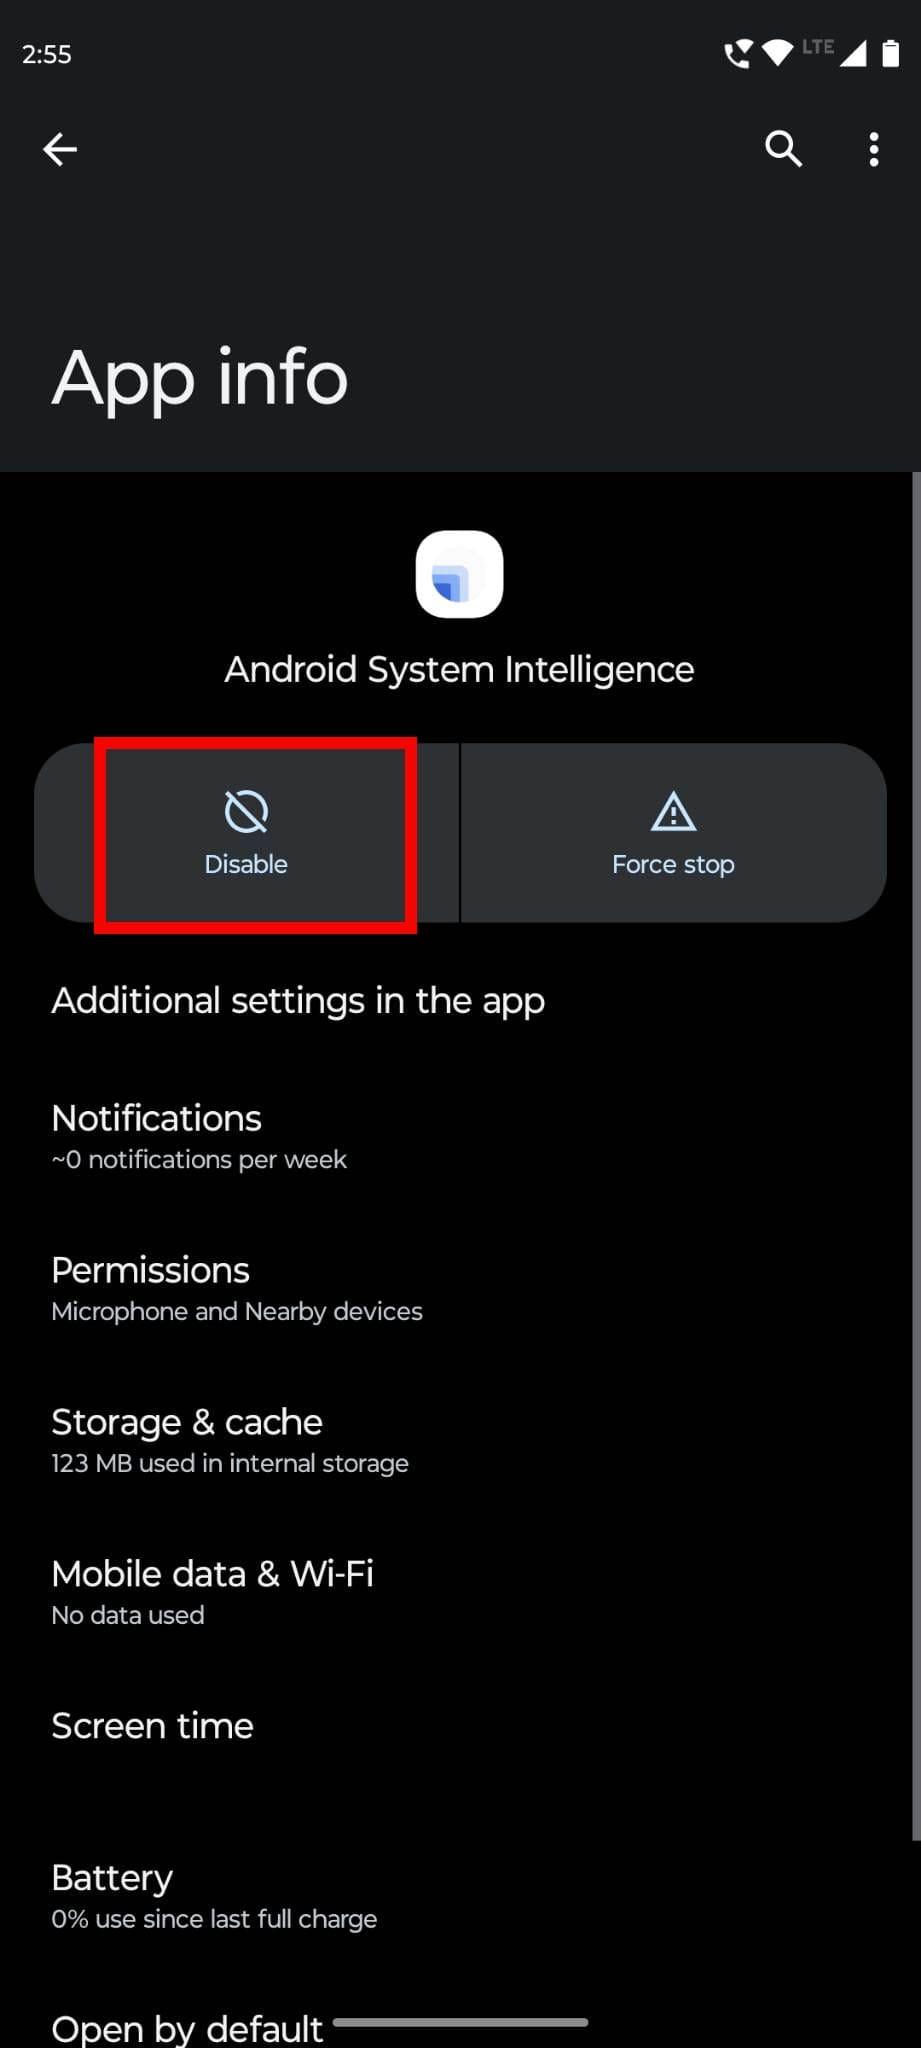 Tap on Disable button